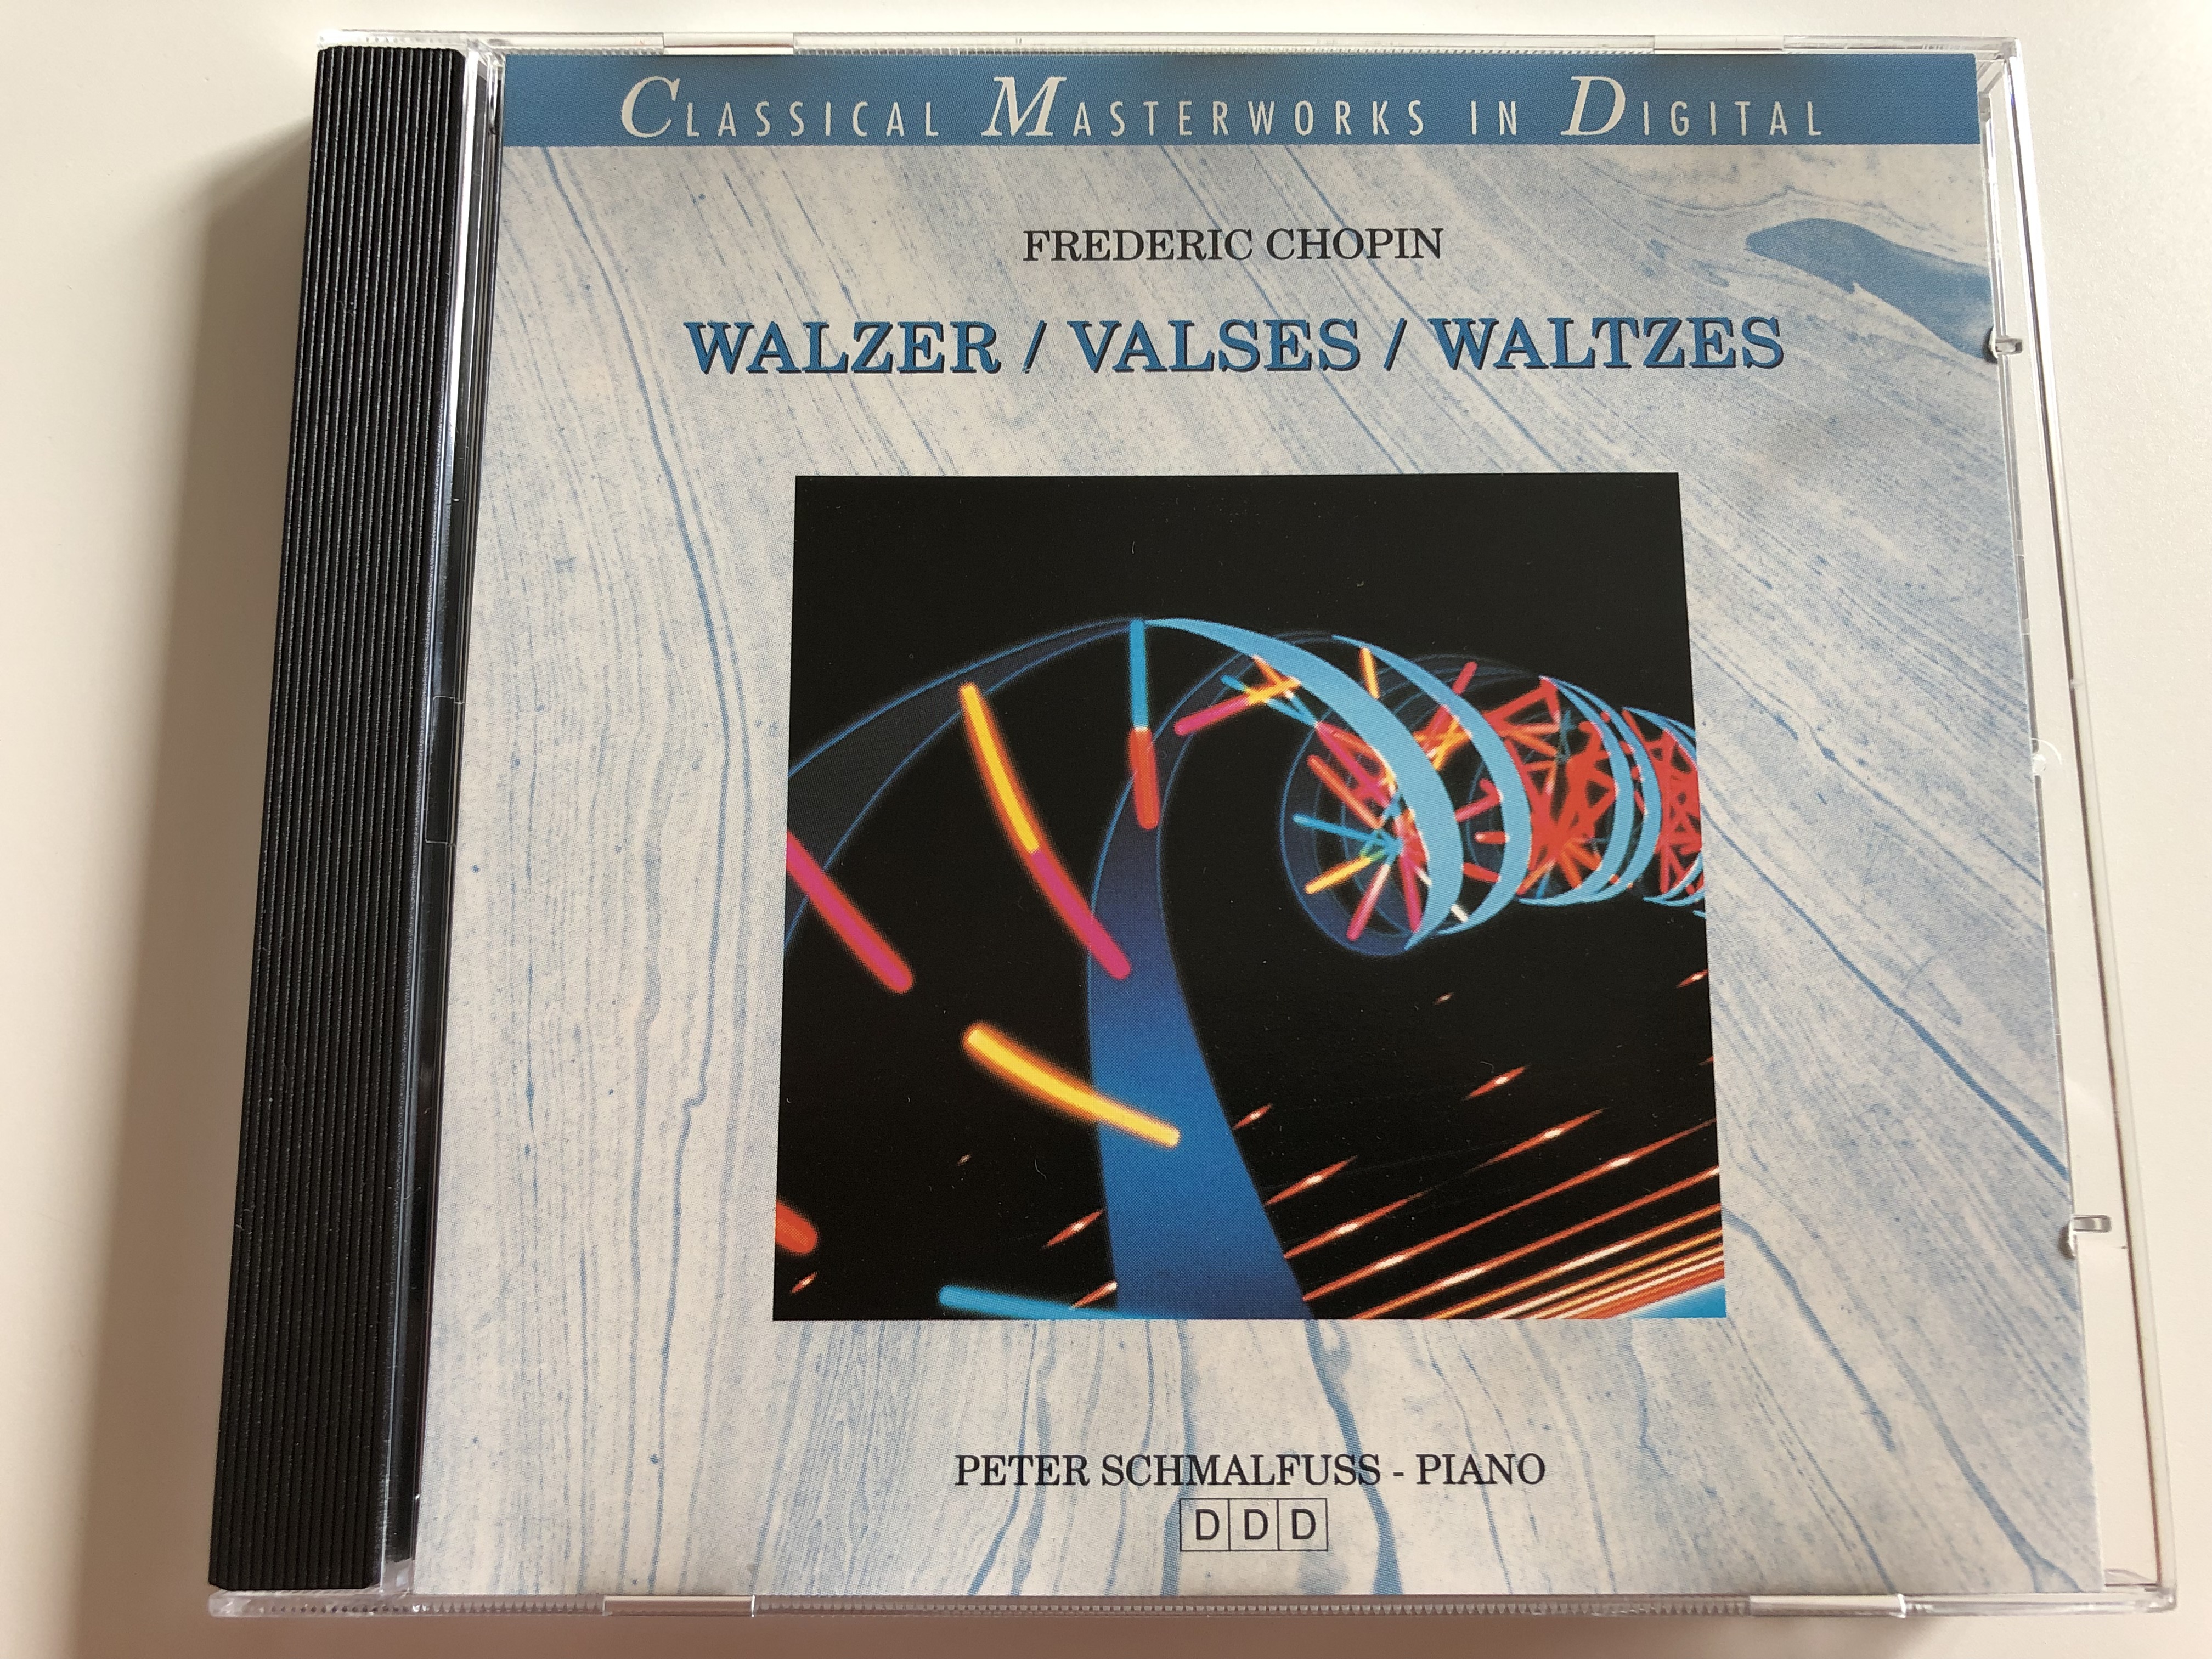 fr-d-ric-chopin-walzer-valses-waltzes-peter-schmalfuss-piano-classical-masterworks-in-digital-selected-sound-carrier-audio-cd-1990-506-1-.jpg